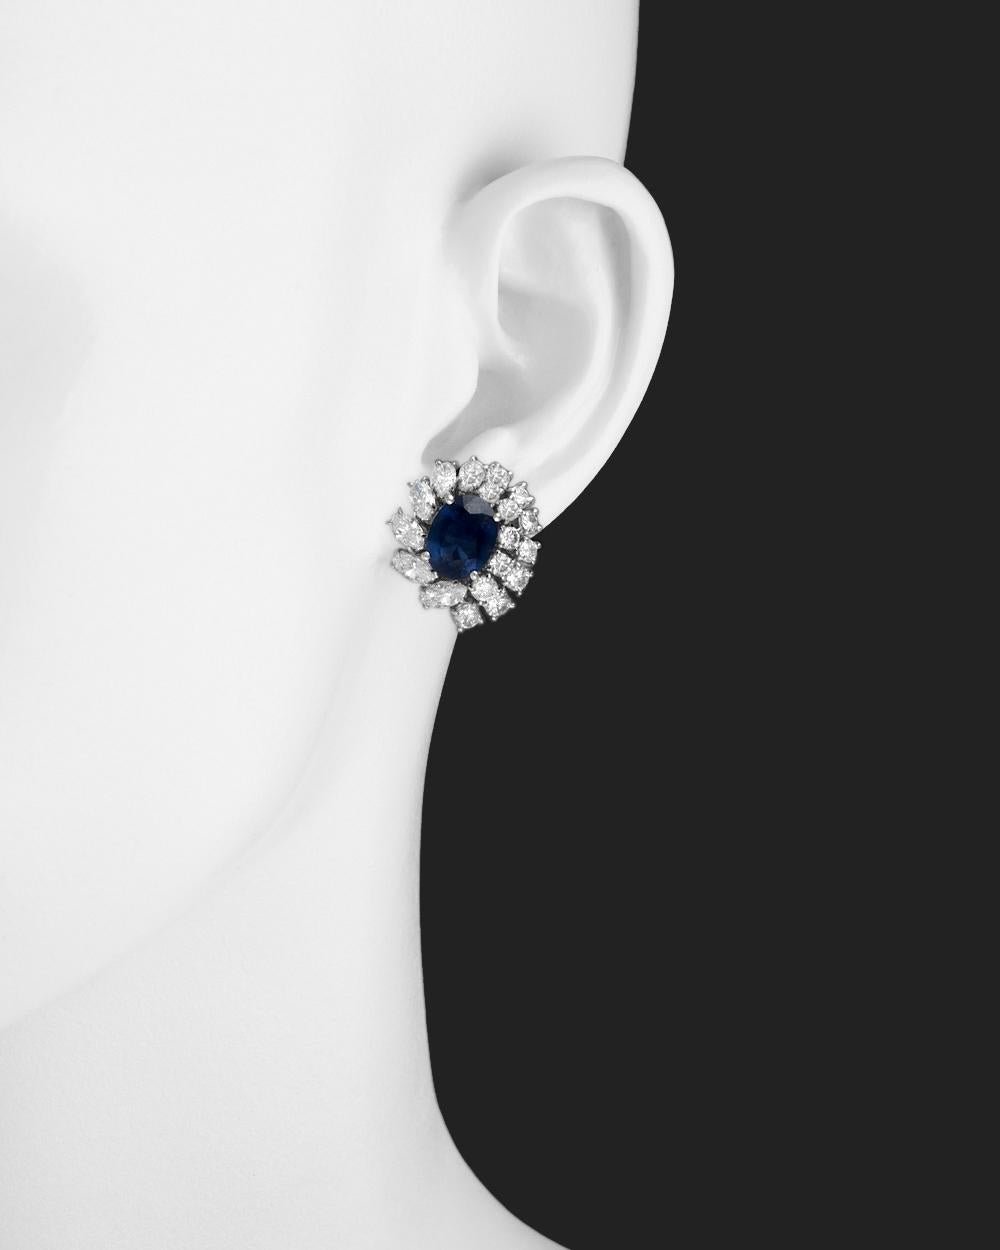 Sapphire and diamond cluster earrings, featuring a larger oval-shaped sapphire accented by round brilliant-cut and marquise-shaped diamonds, in 18k white gold, signed Giovane.
 

Two sapphires weighing ~6.65 total carats
Diamonds weighing ~5.40